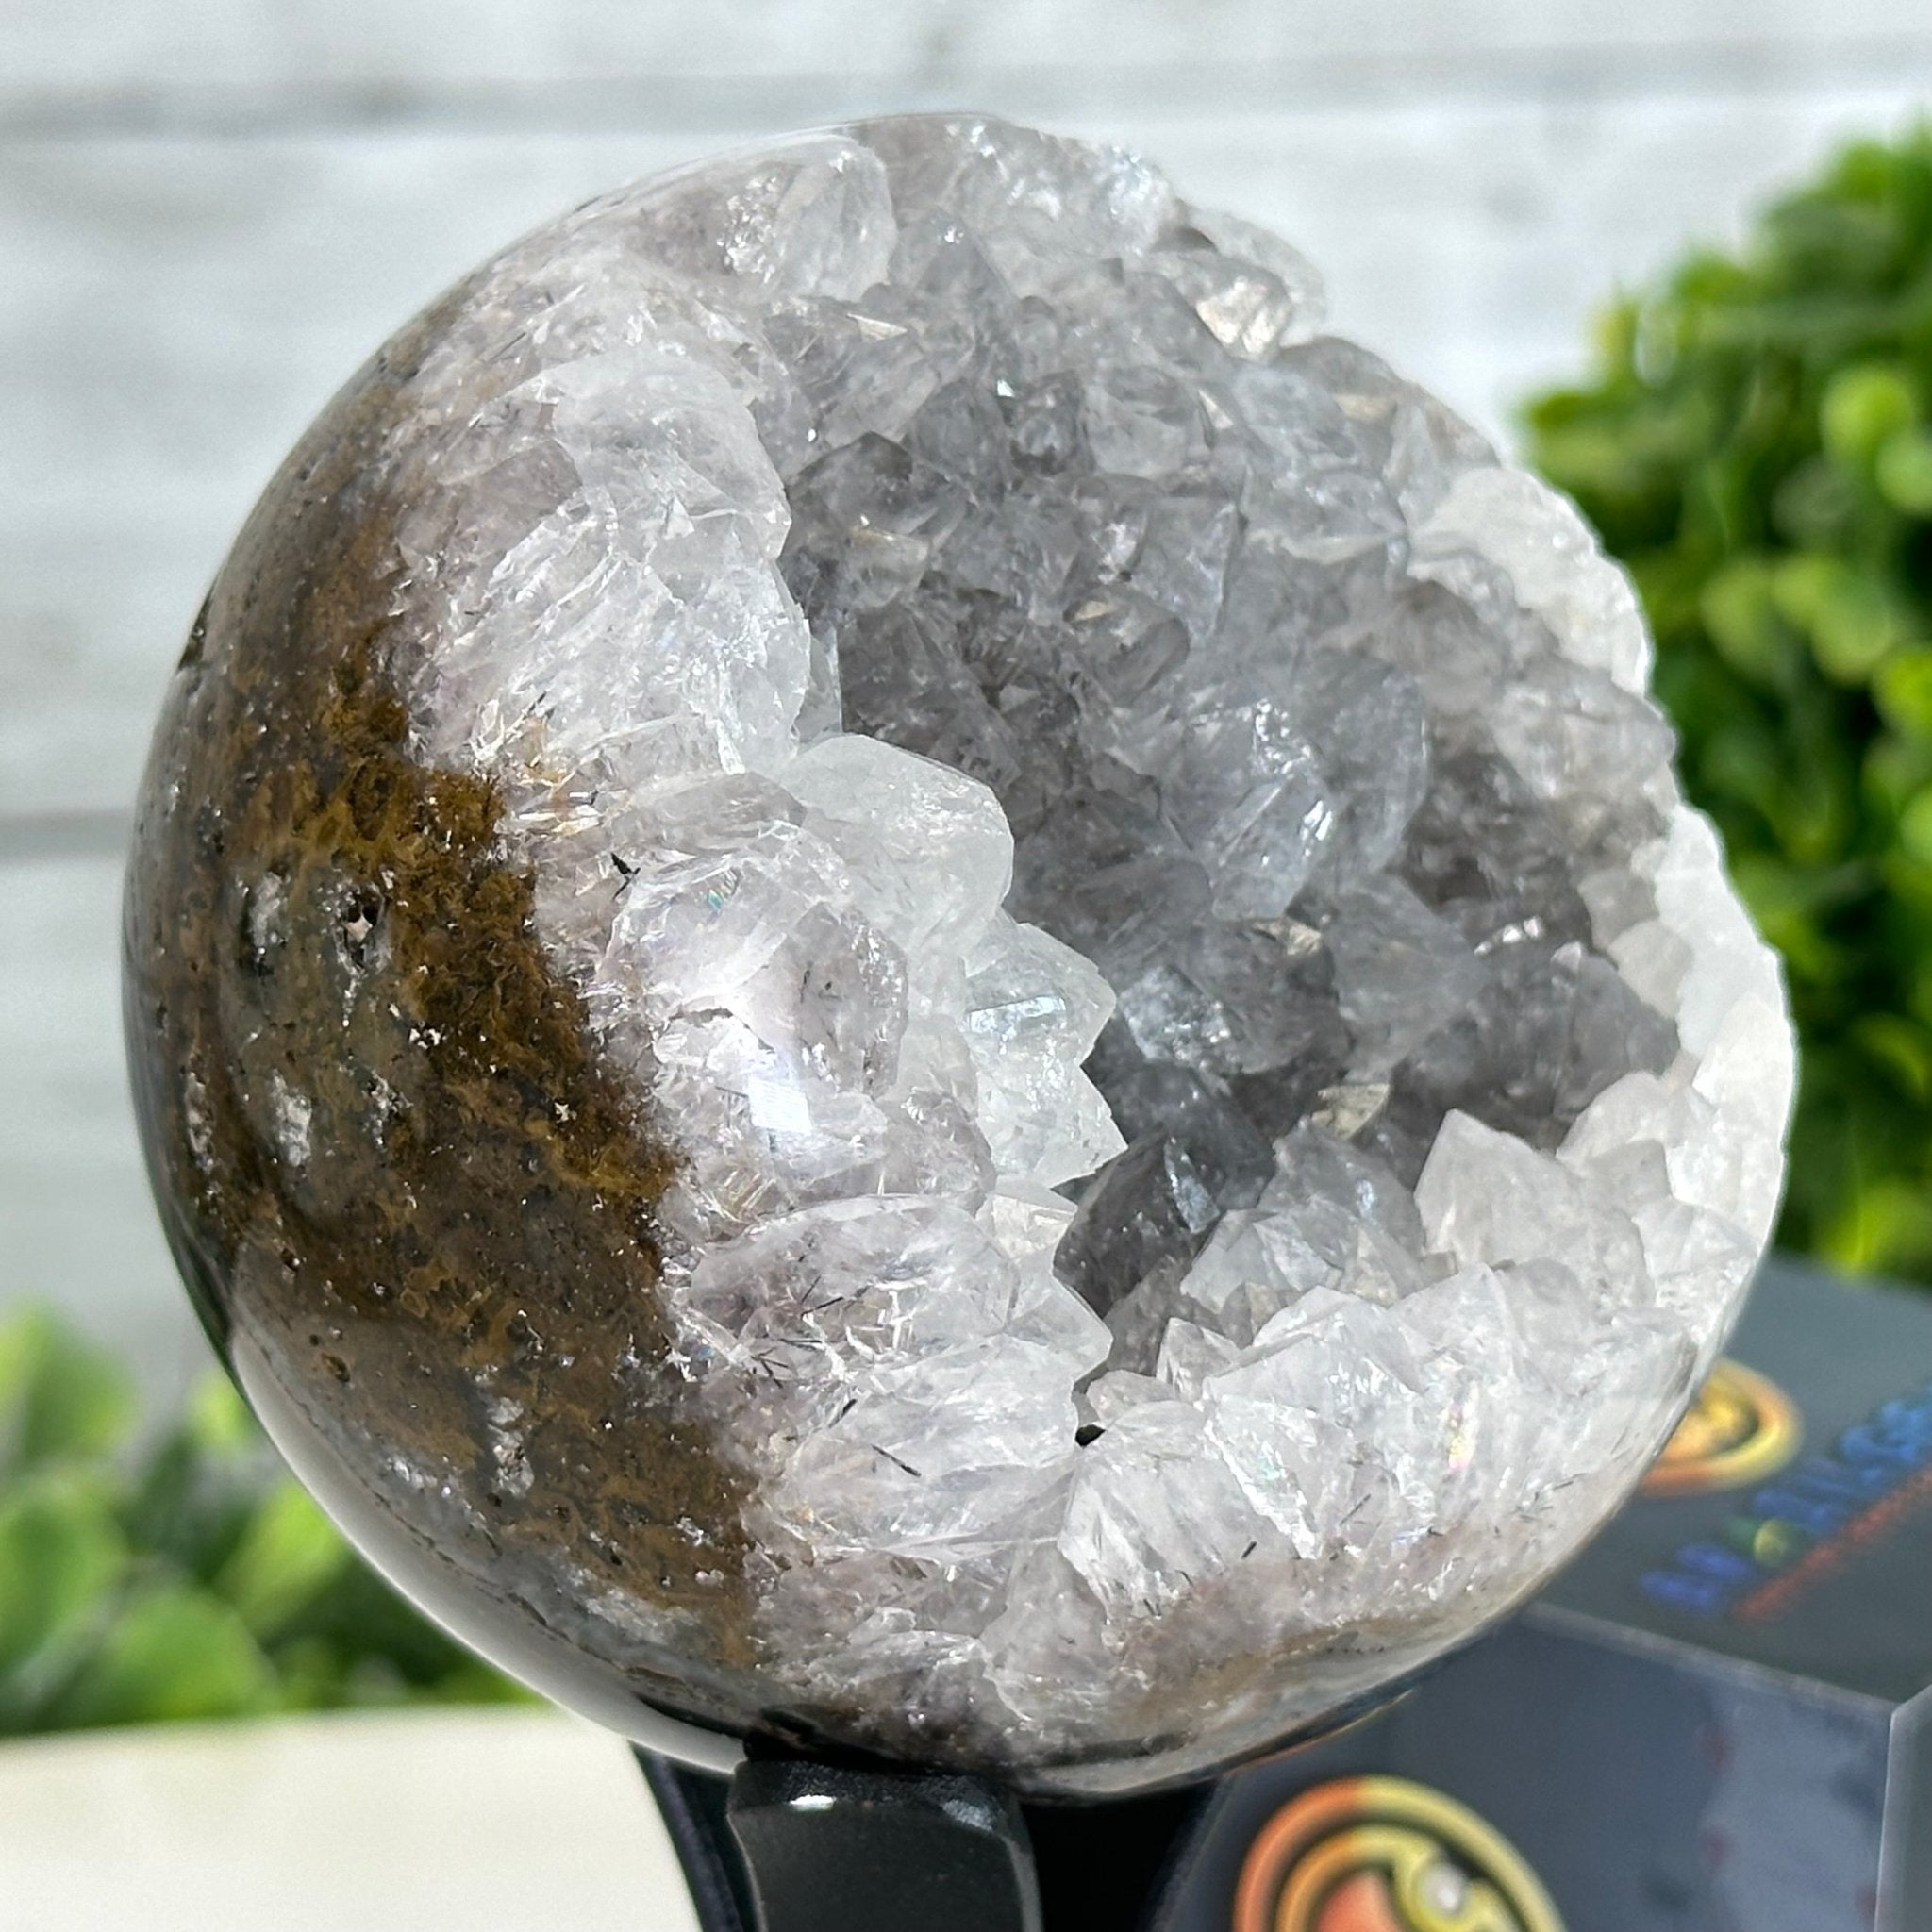 Druzy White Amethyst Sphere on a Metal Stand, 1.1 lbs & 6.7" Tall #5630-0037 - Brazil GemsBrazil GemsDruzy White Amethyst Sphere on a Metal Stand, 1.1 lbs & 6.7" Tall #5630-0037Spheres5630-0037